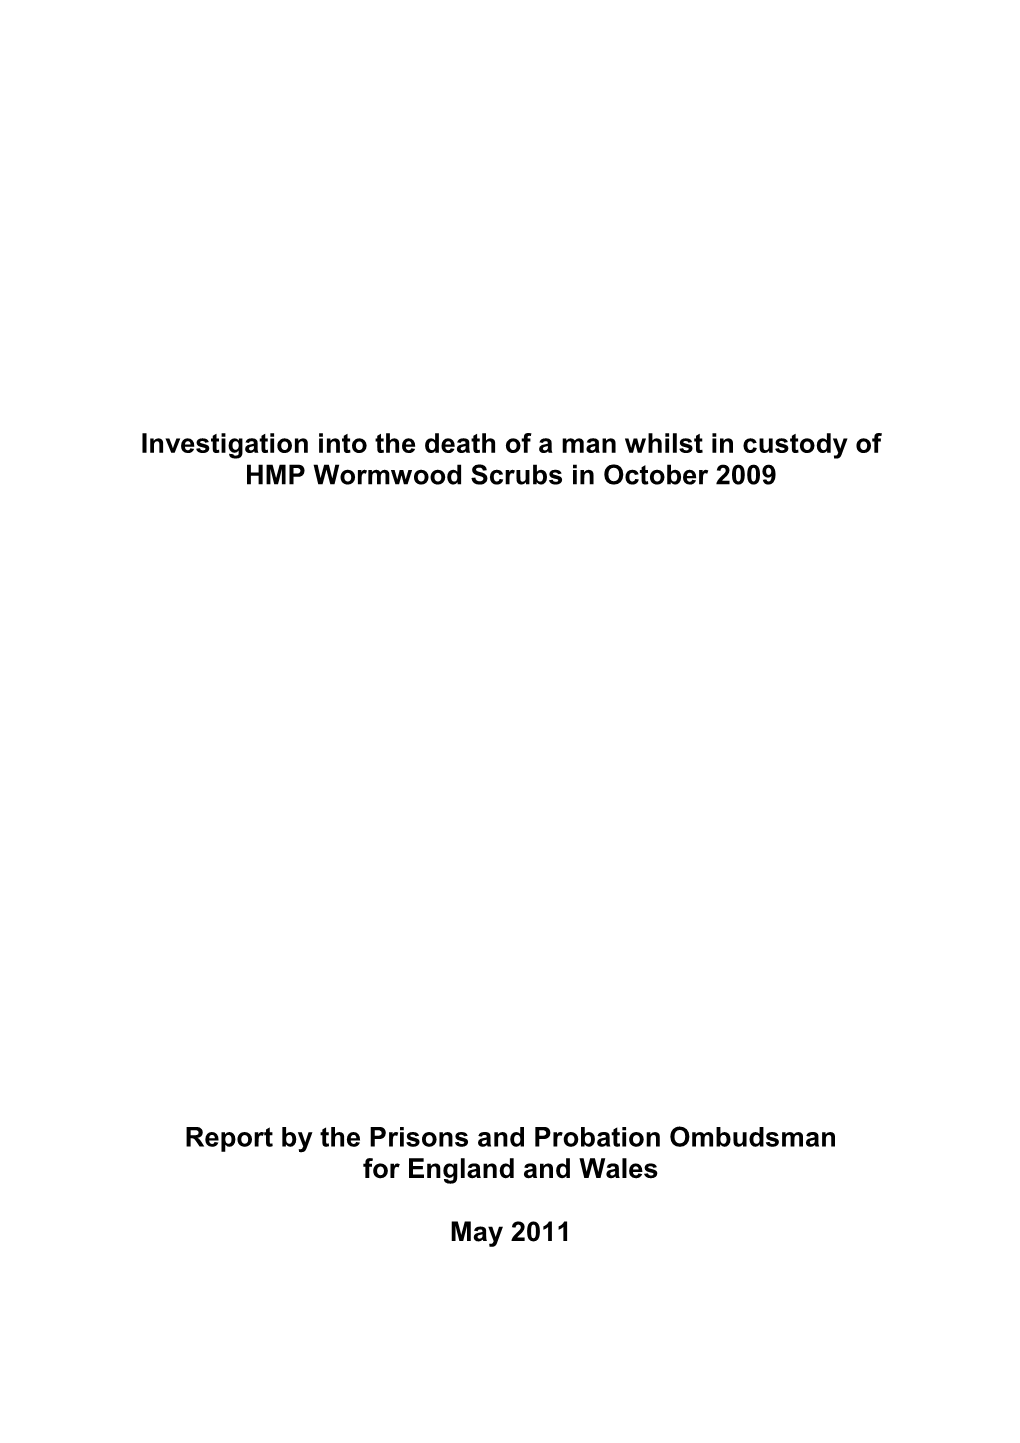 Investigation Into the Death of a Man Whilst in Custody of HMP Wormwood Scrubs in October 2009 Report by the Prisons and Proba